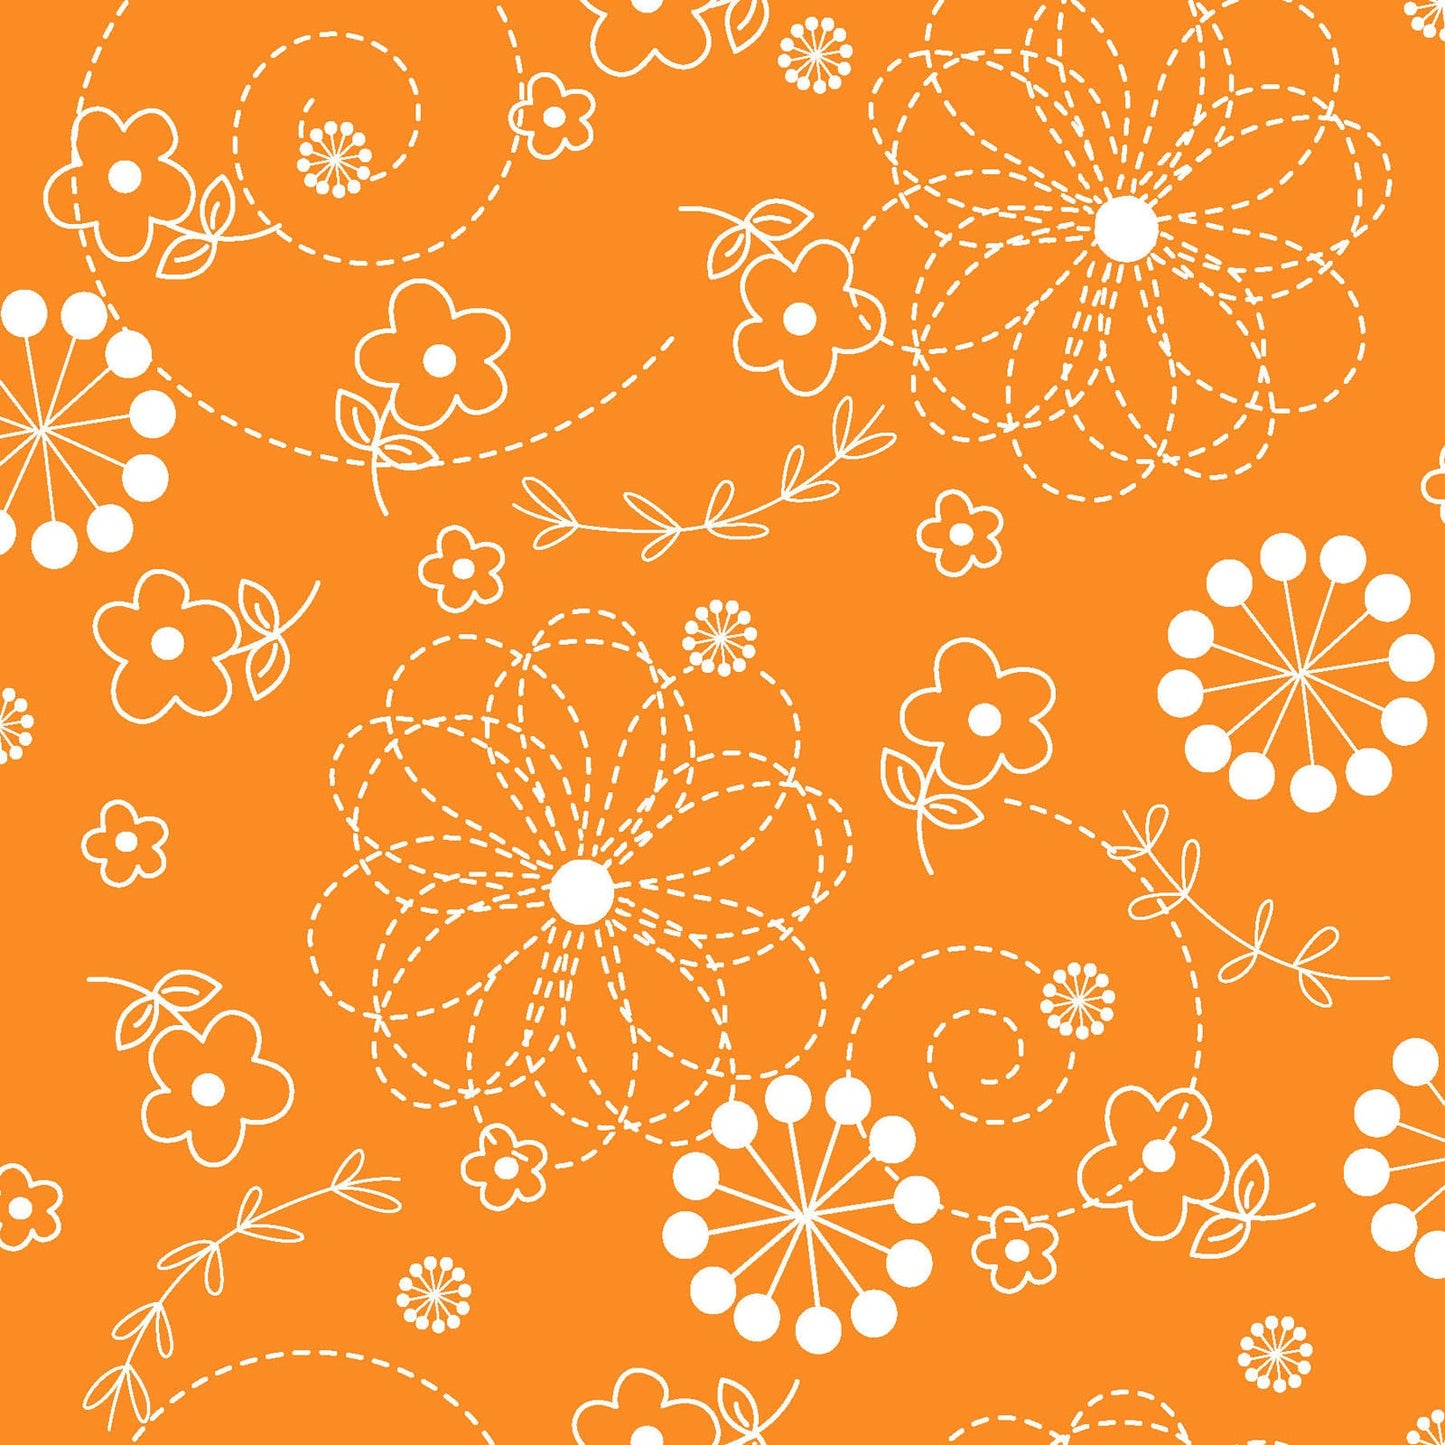 White on Orange Doodles is part of the Kimberbell Basics line designed by Kim Christopherson for Maywood Studio. This fabric features white, pin-stitched flowers and dandelion bursts on an orange background. It is perfect for adding variety to any project and the pattern and color blend seamlessly with other Kimberbell Basic fabrics.